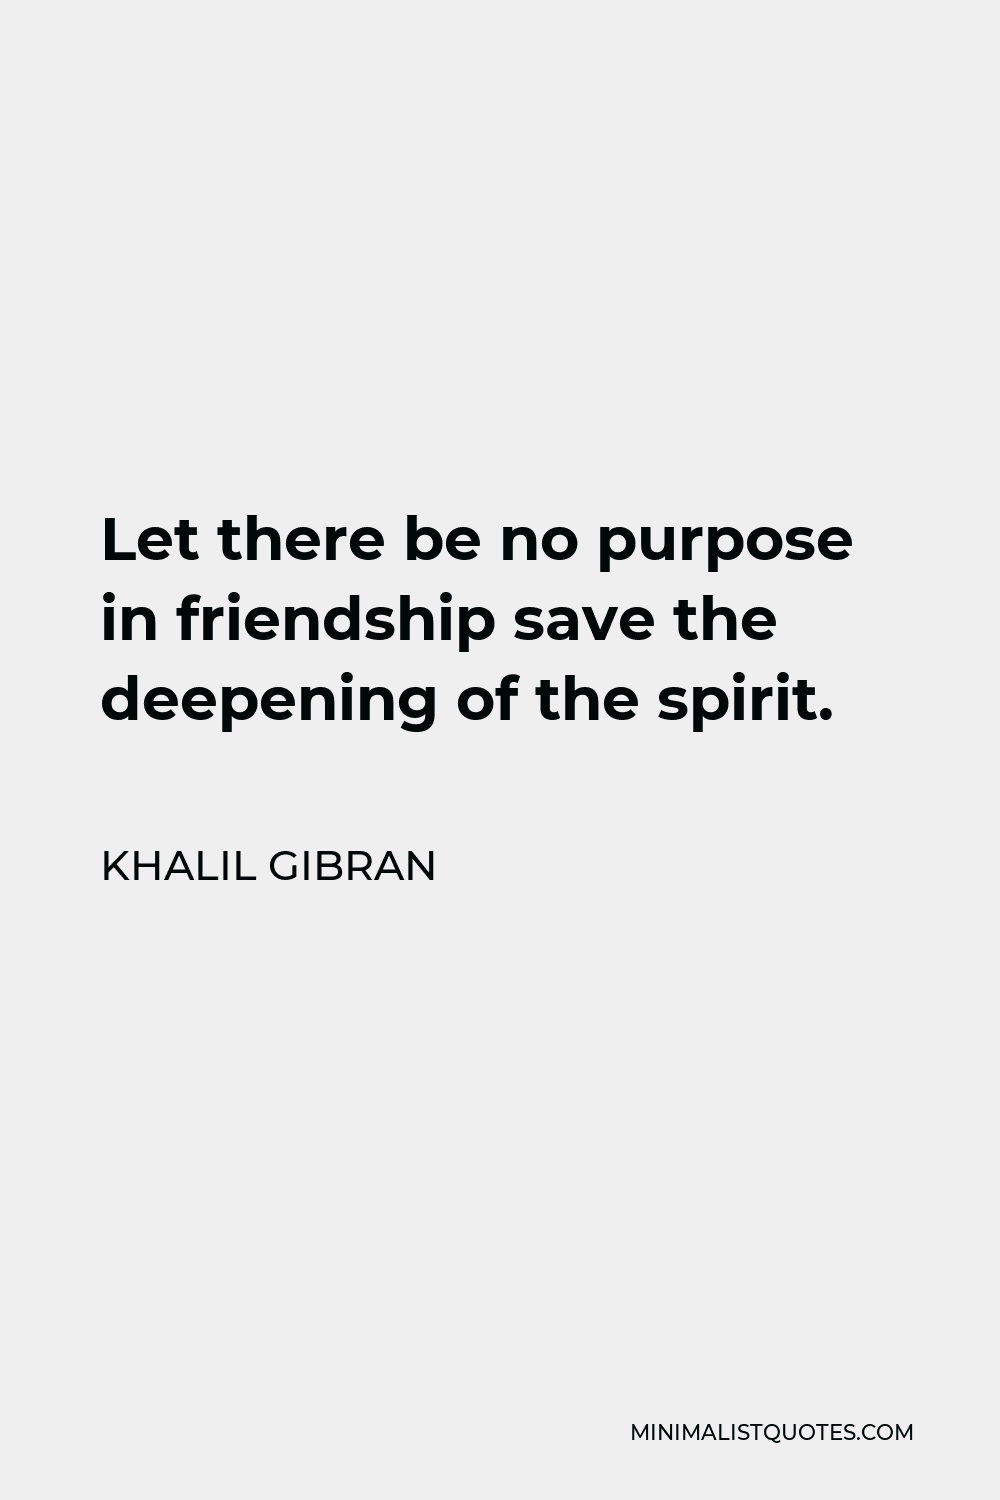 Khalil Gibran Quote - Let there be no purpose in friendship save the deepening of the spirit.